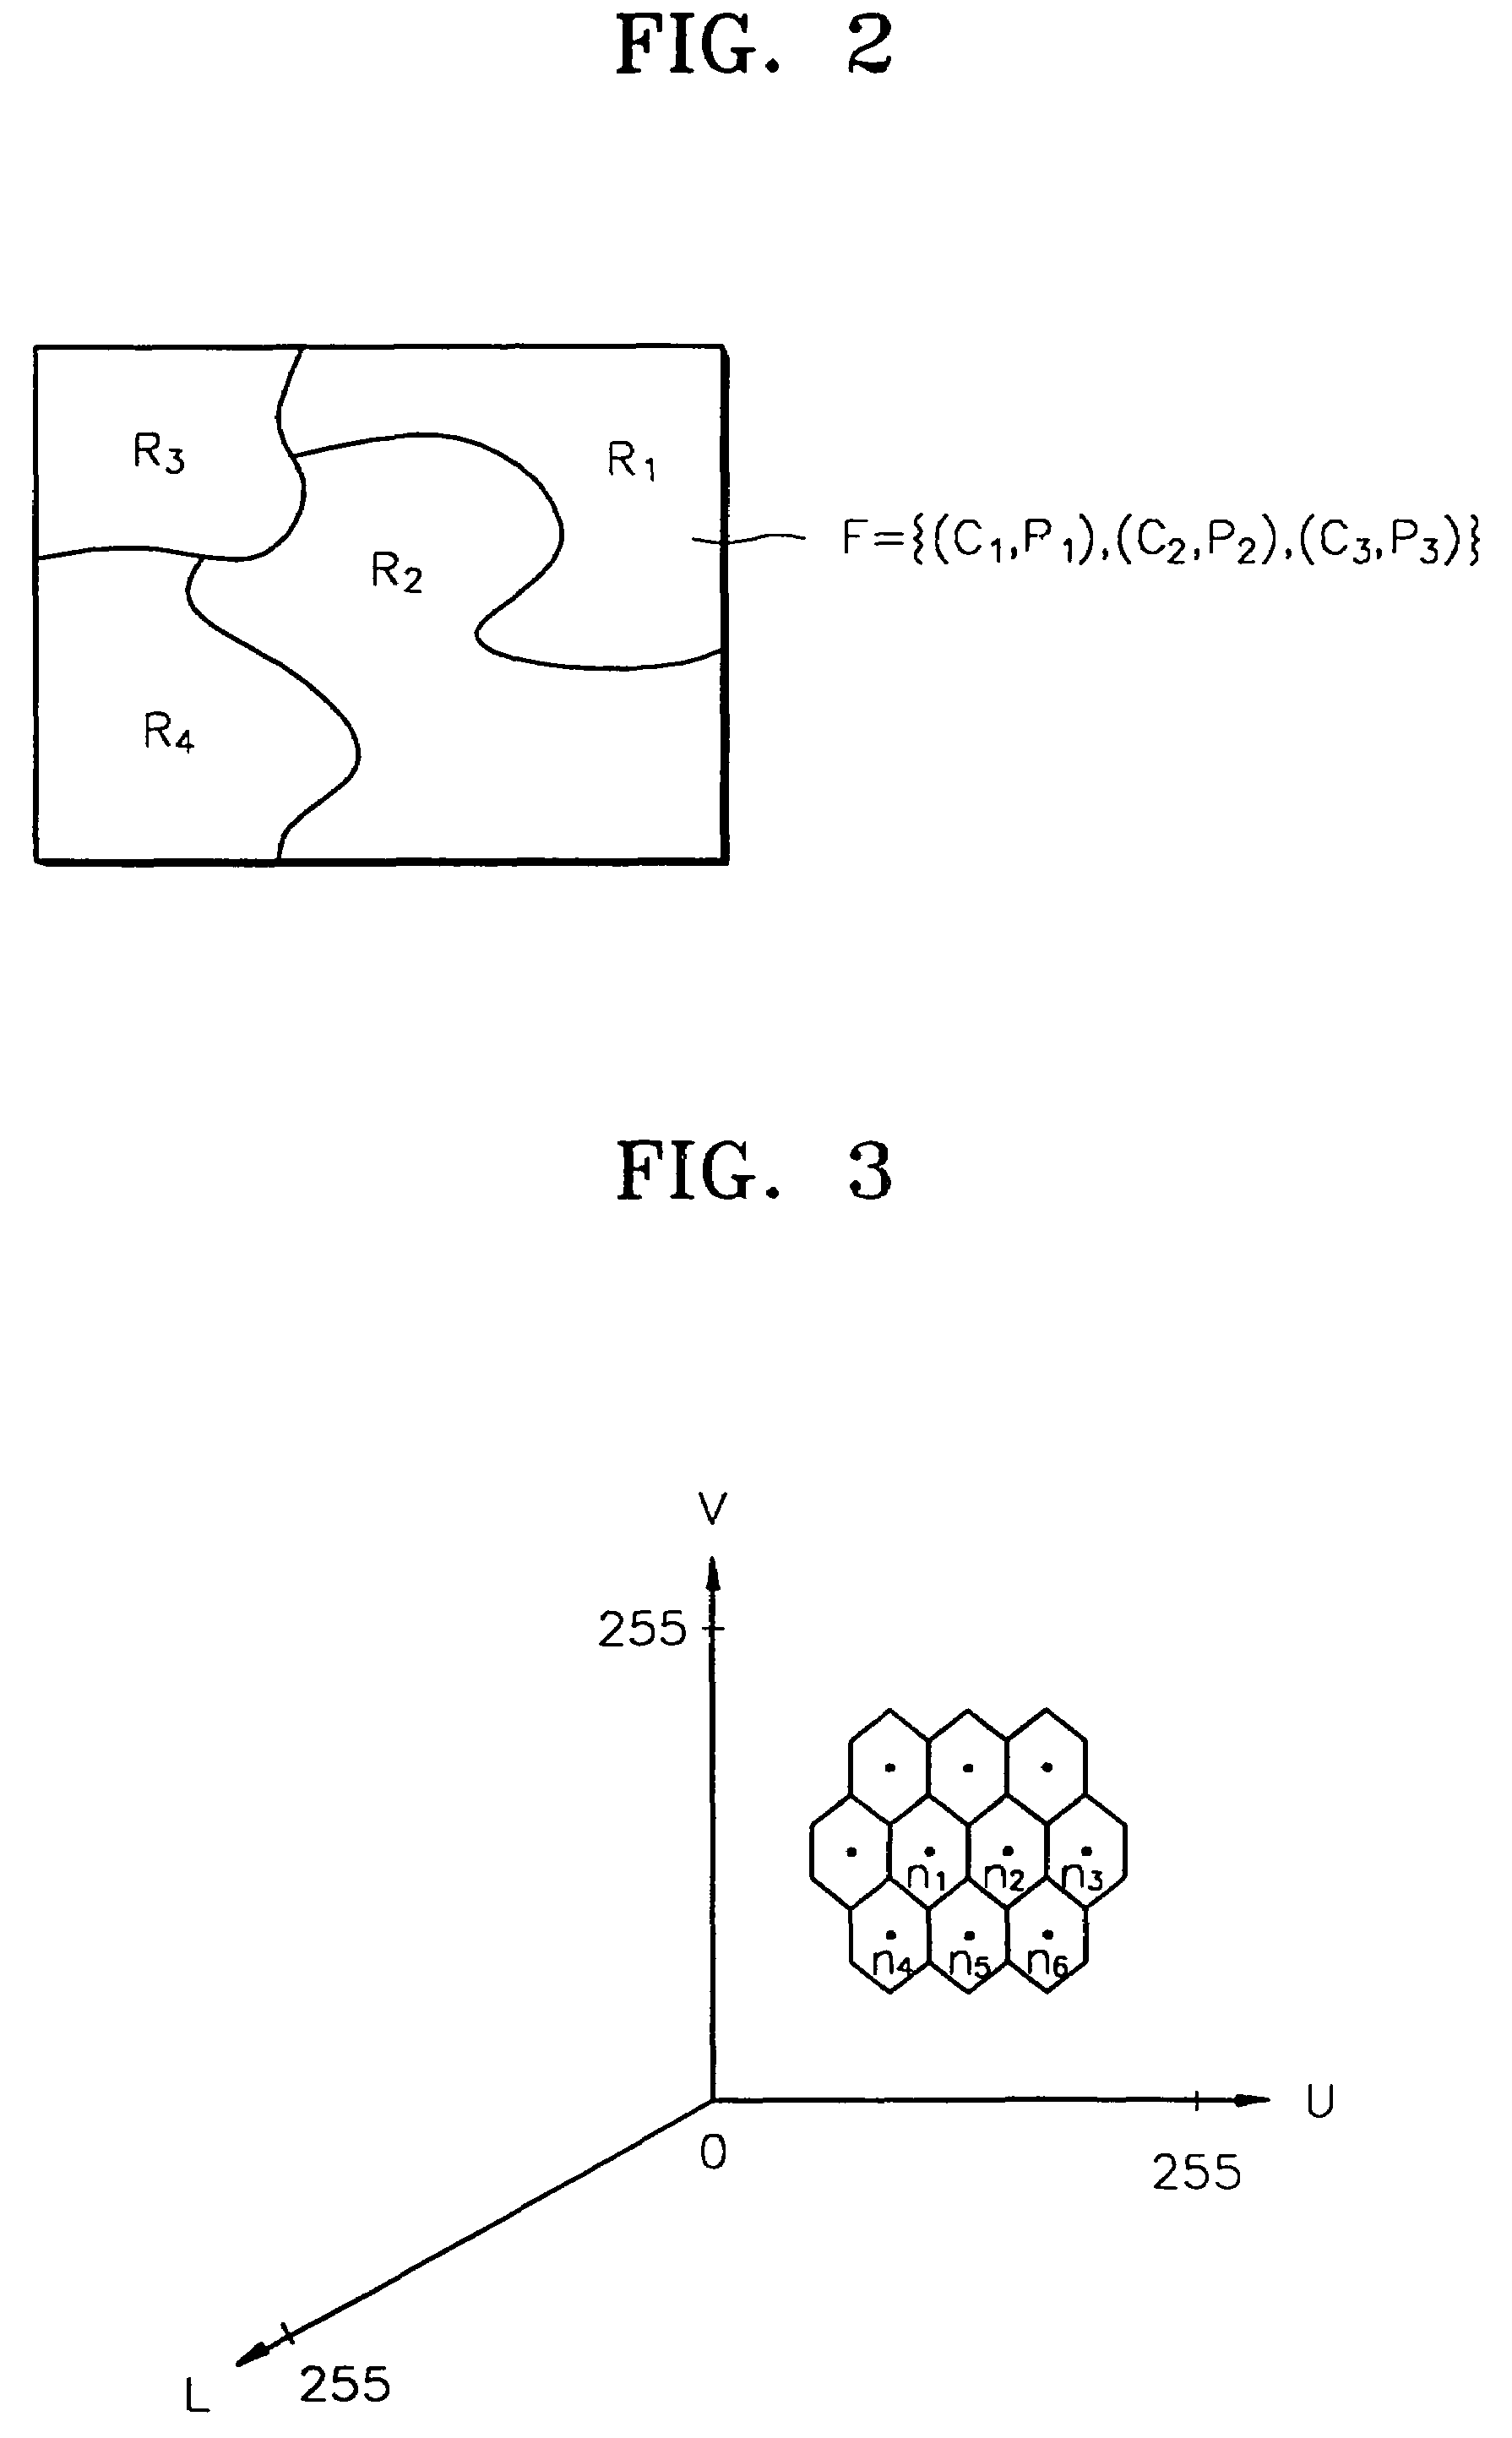 Color image processing method for indexing an image using a lattice structure